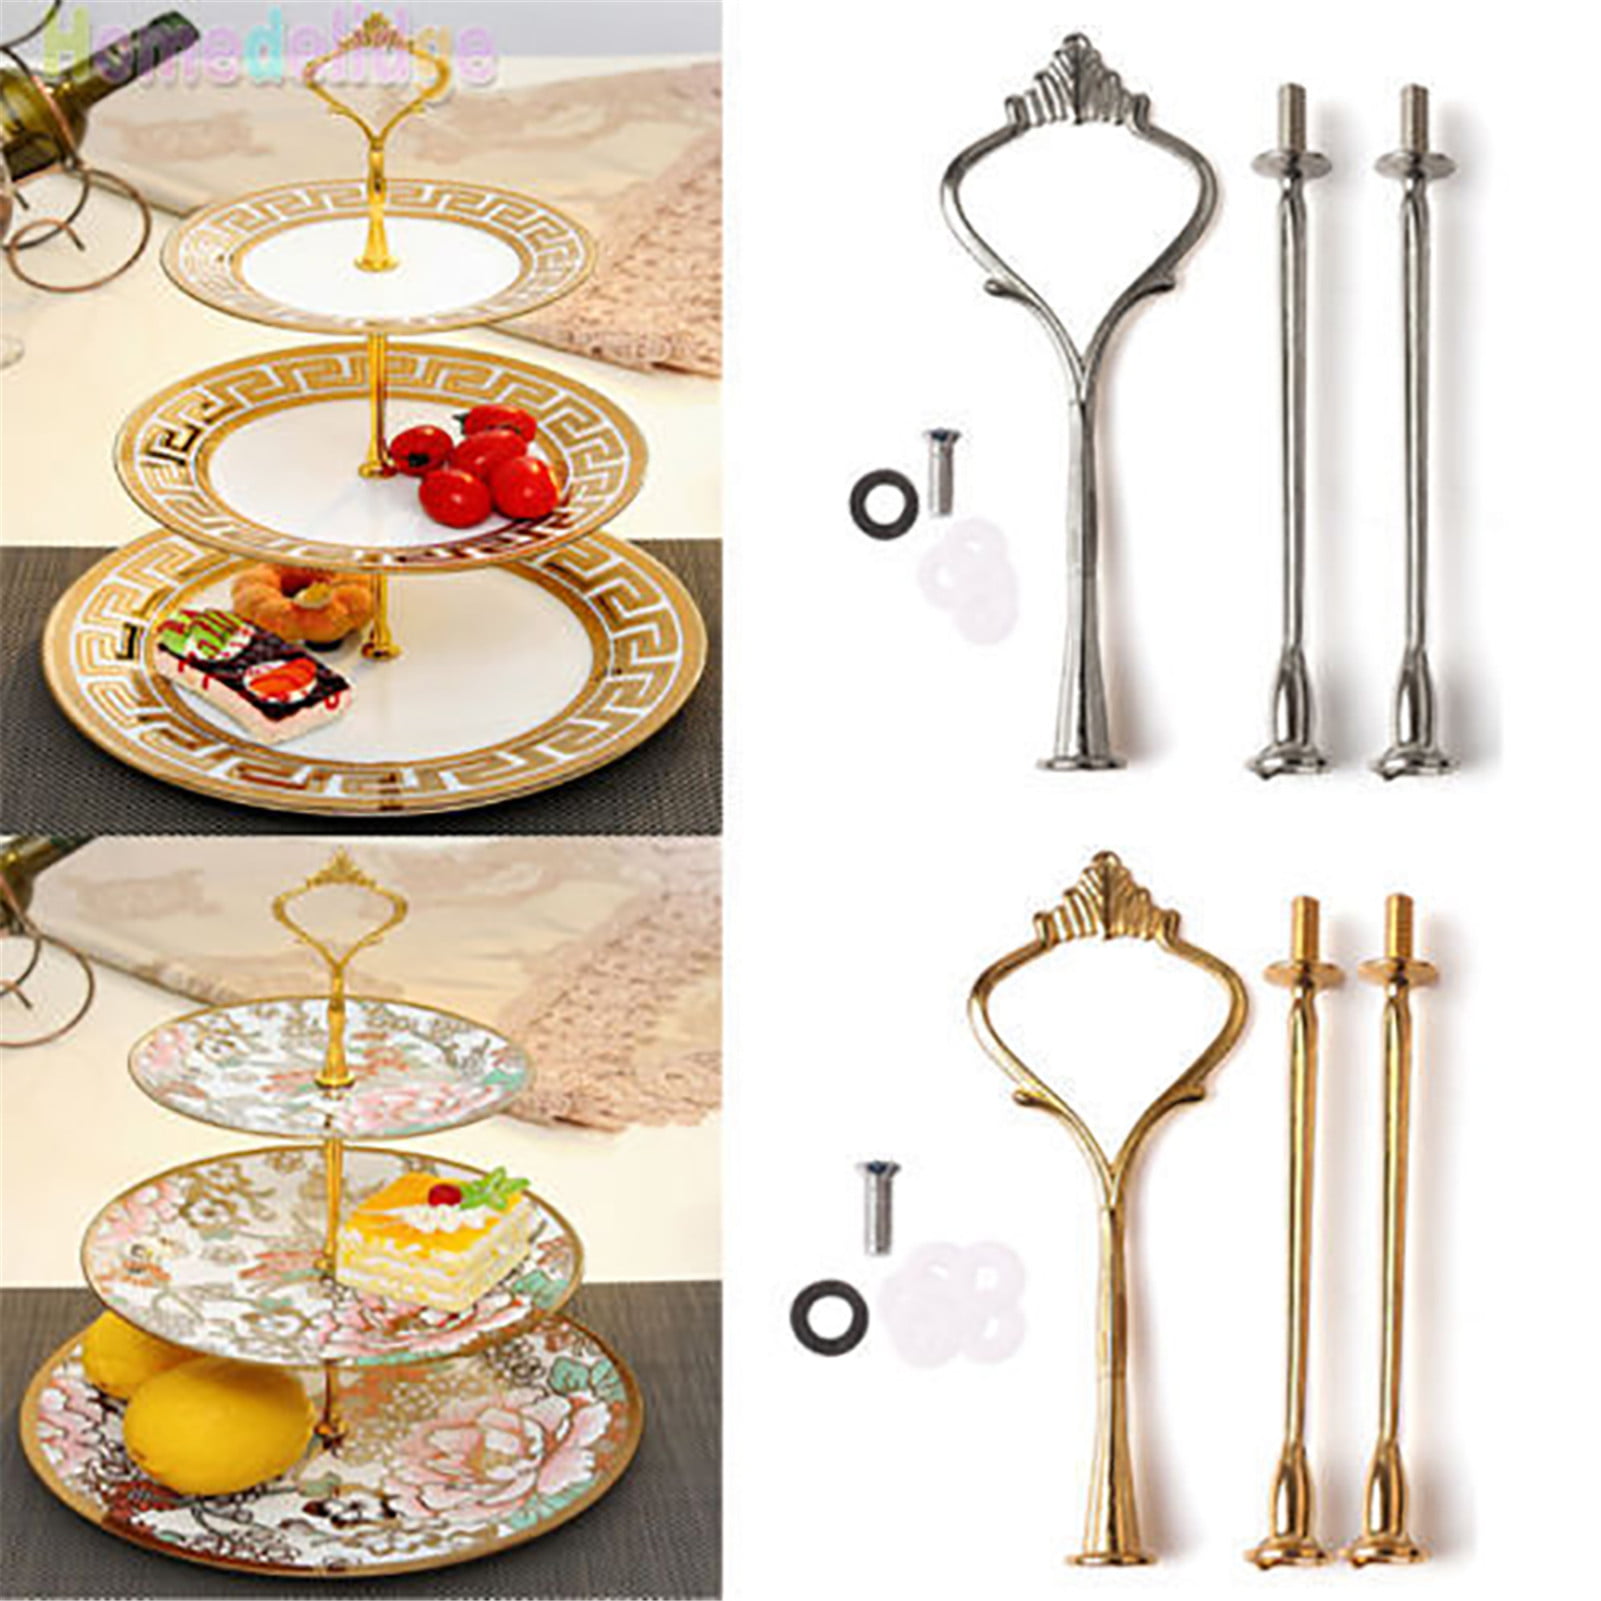 2/3 Tier Cake Plate Stand Cupcake Fittings Silver Golden Wedding Party CocktaiA!